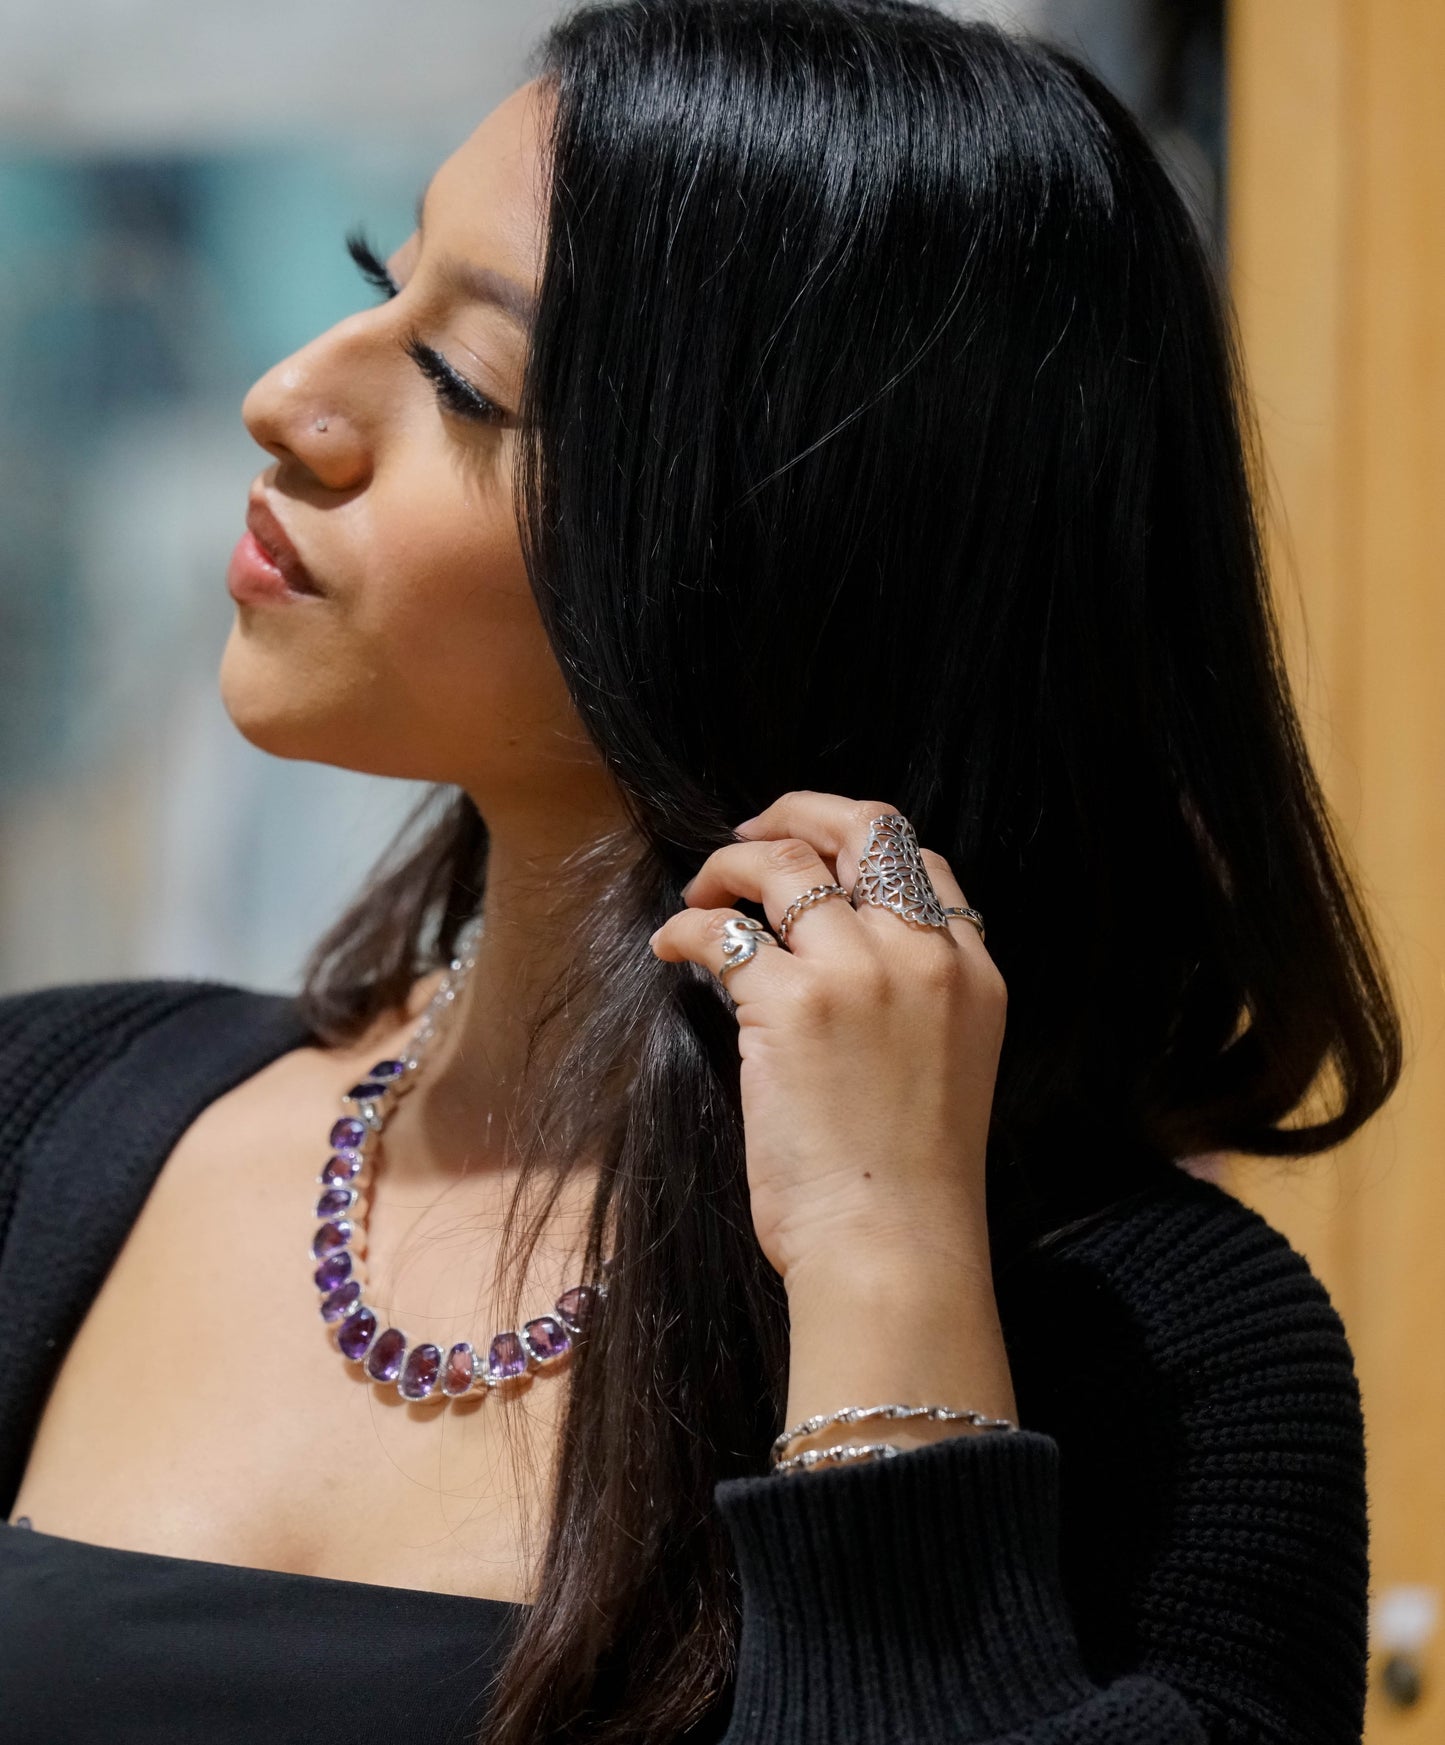 
                  
                    A woman with long dark hair, wearing a black top and a Statement Gemstone Necklace adorned with amethyst beads, rings, and a nose stud, holds a strand of her hair while looking to the side.
                  
                